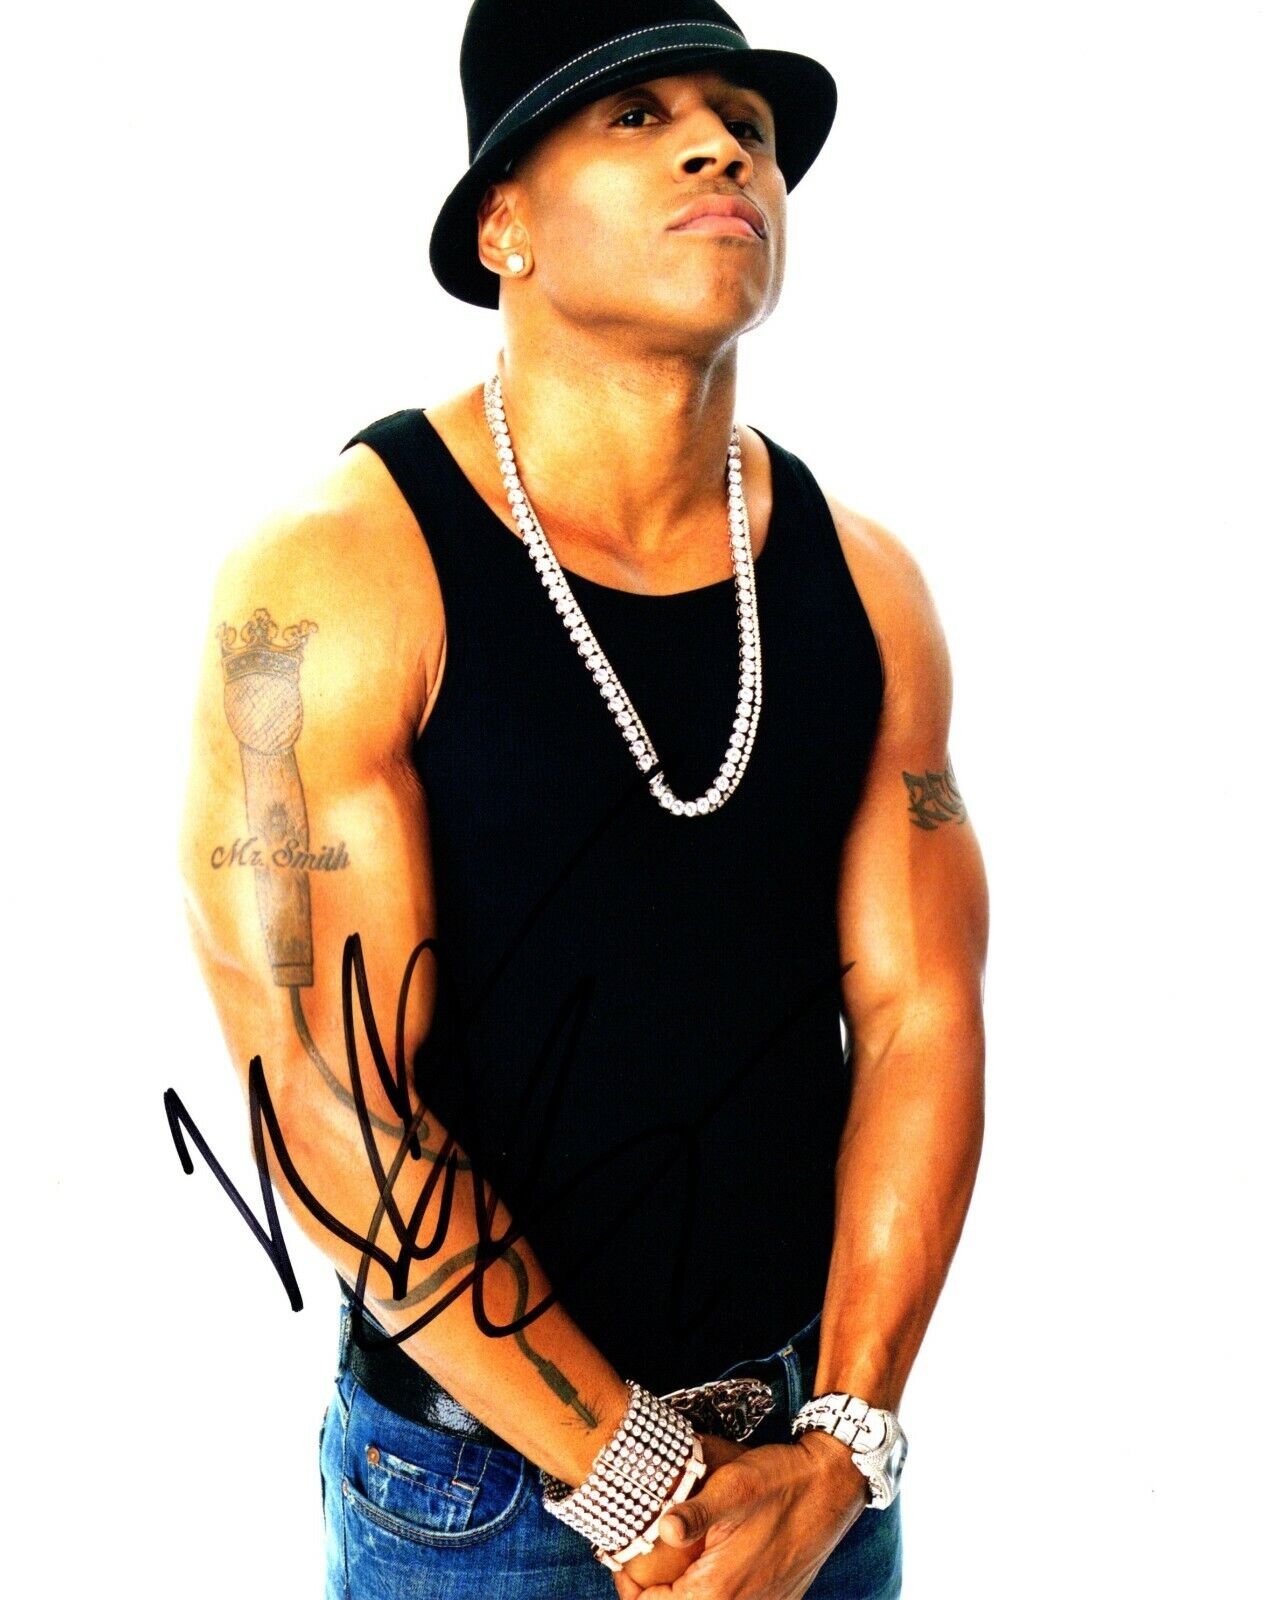 LL Cool J Signed Autographed Concert 8x10 inch Photo Poster painting James Smith NCIS Actor +COA